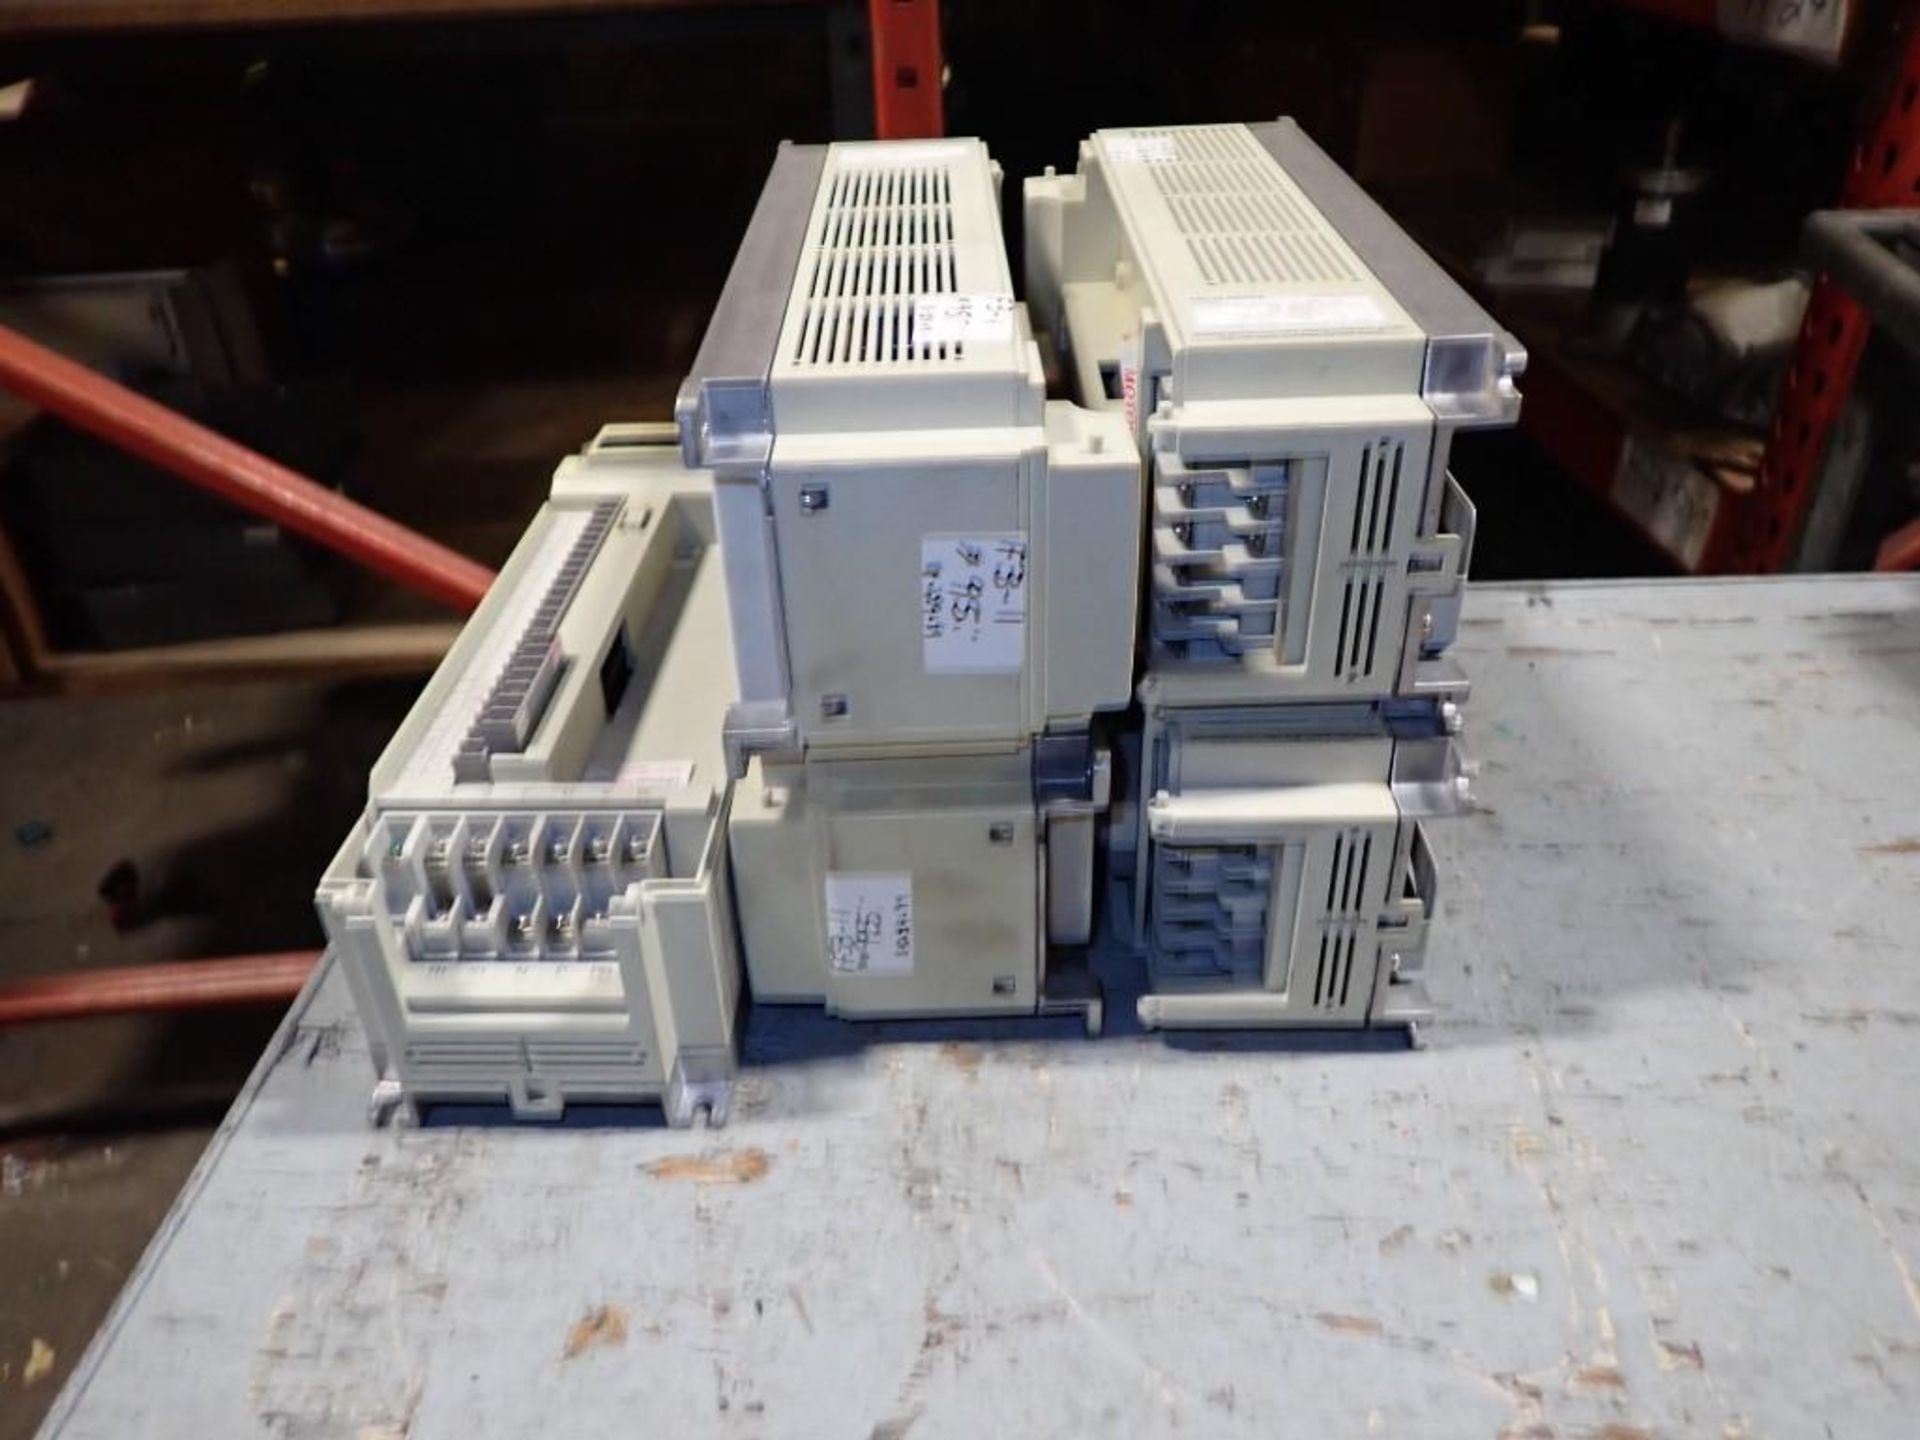 Lot of (5) Mitsubishi Inverters, FR-A220-0.4K-UL, NO COVER - Image 2 of 4